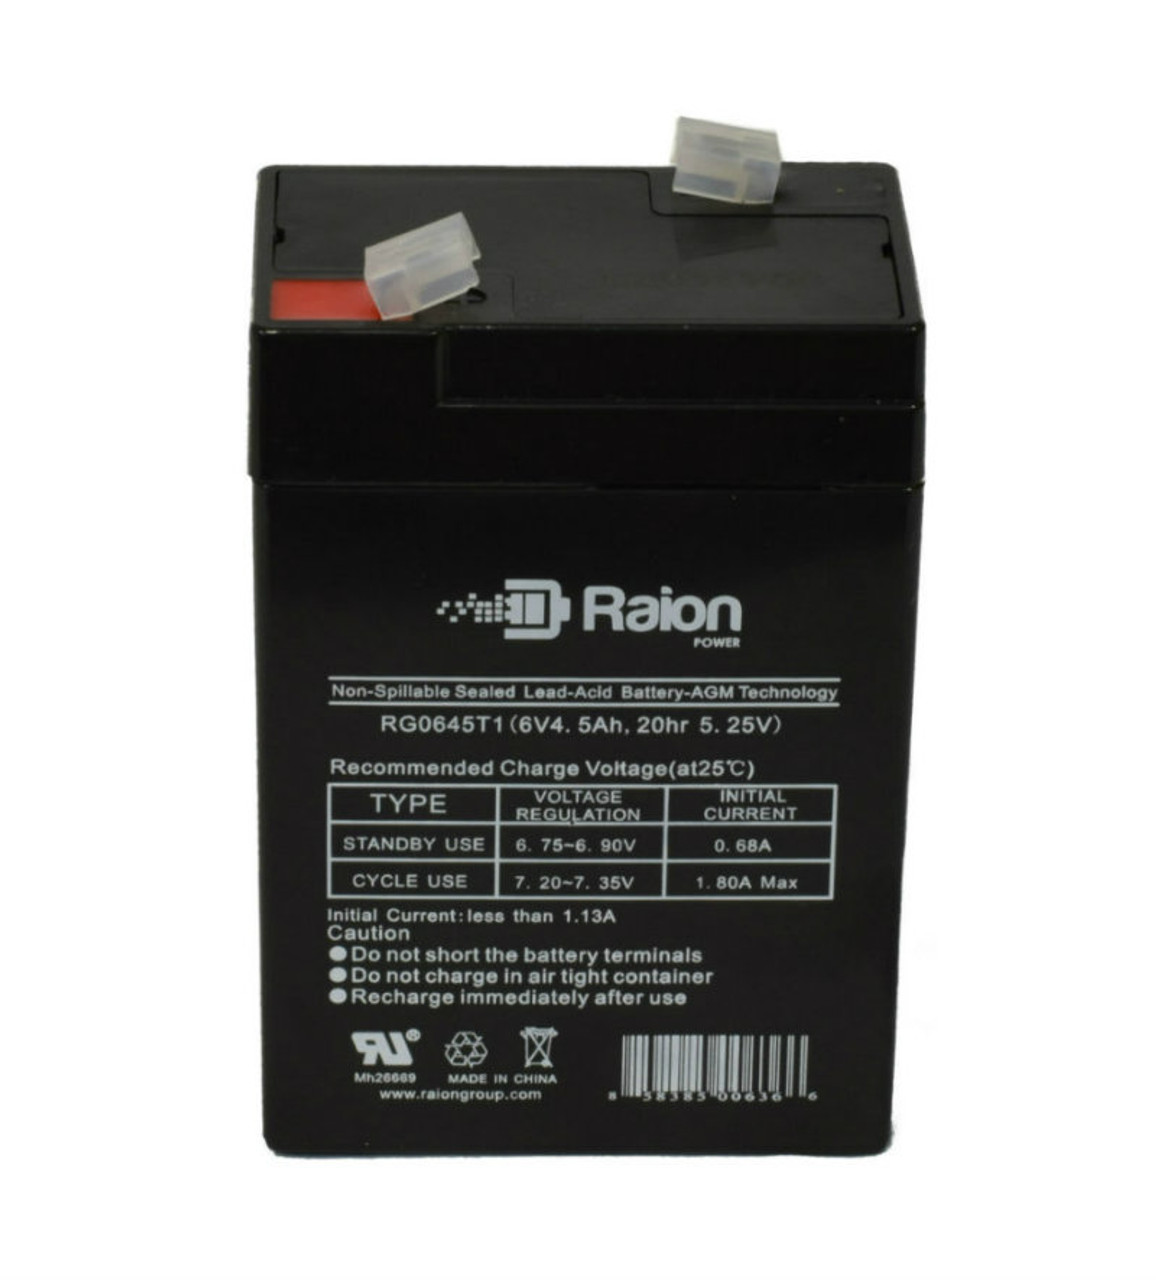 Raion Power RG0645T1 Replacement Battery Cartridge for Power Source WP4.5-6 (91-040)